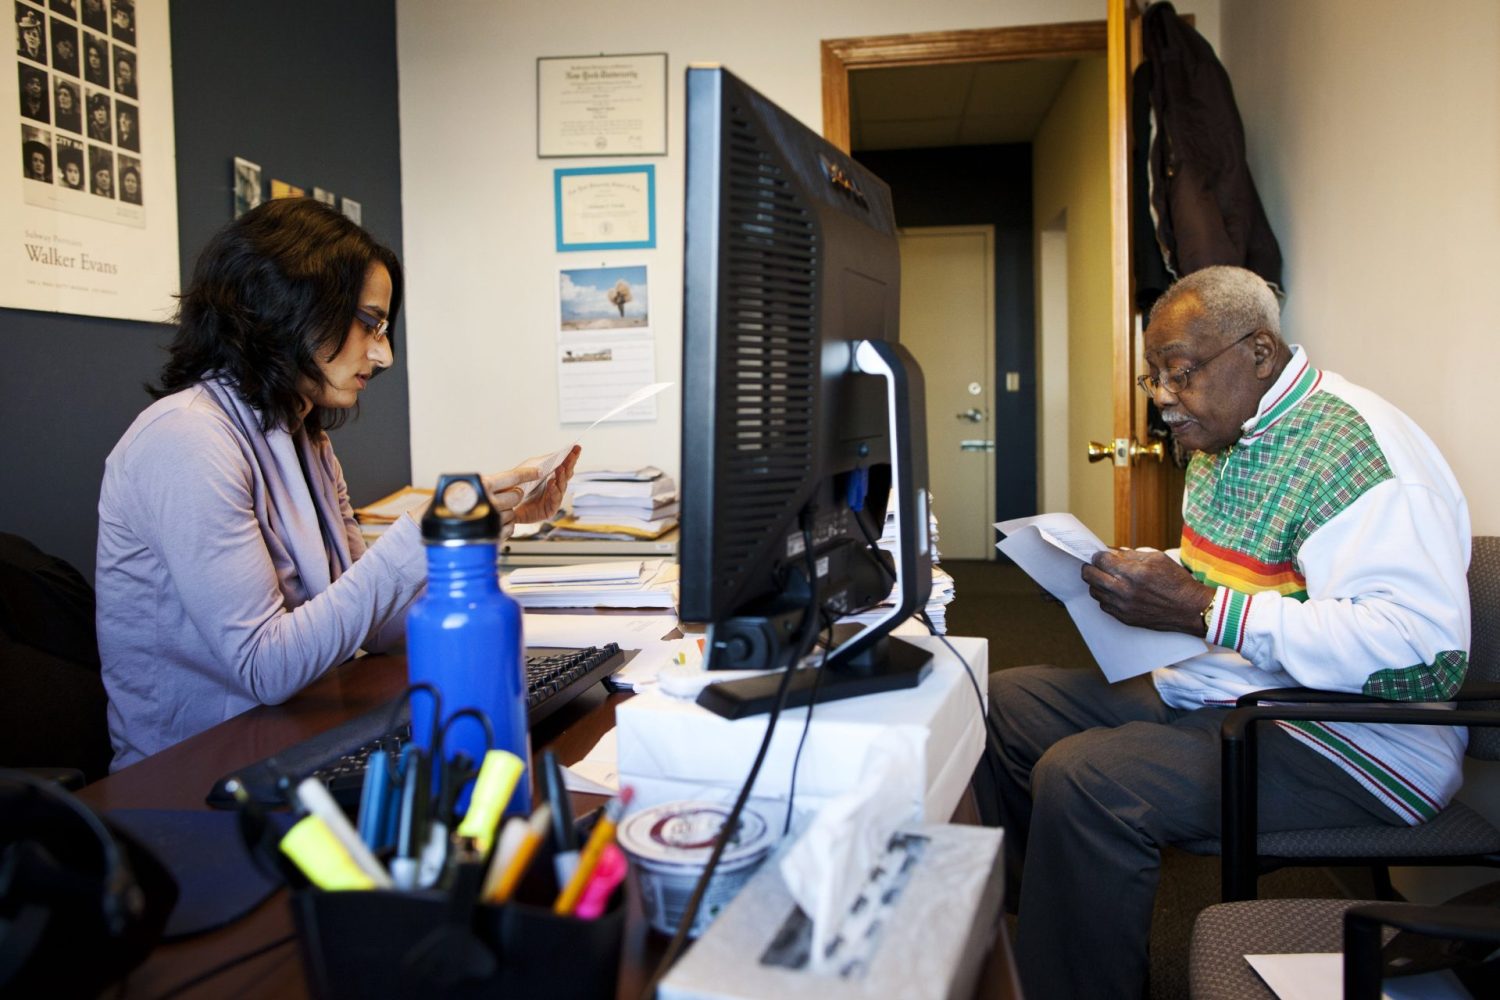 Hamson McPherson (R), 77, looks over paper work from Wells Fargo regarding a denied loan modification request for his mortgage, with Shabnam Faruki, a lawyer at Staten Island Legal Services, in Staten Island, New York, December 9, 2011. McPherson has owned his home since 1974 but was recently denied by Wells Fargo for a loan modification request. McPherson is now working with Shabnam Faruki, a lawyer at Staten Island Legal Services to appeal the bank on their denial. Three years after the foreclosure crisis began, the process to apply for a loan modification remains a bureaucratic nightmare that is complicating the housing recovery and could dull the impact of any Obama administration initiatives in the works. Picture taken December 9, 2011. To match Analysis USA/HOUSING-FORECLOSURES   REUTERS/Andrew Burton (UNITED STATES - Tags: BUSINESS REAL ESTATE)